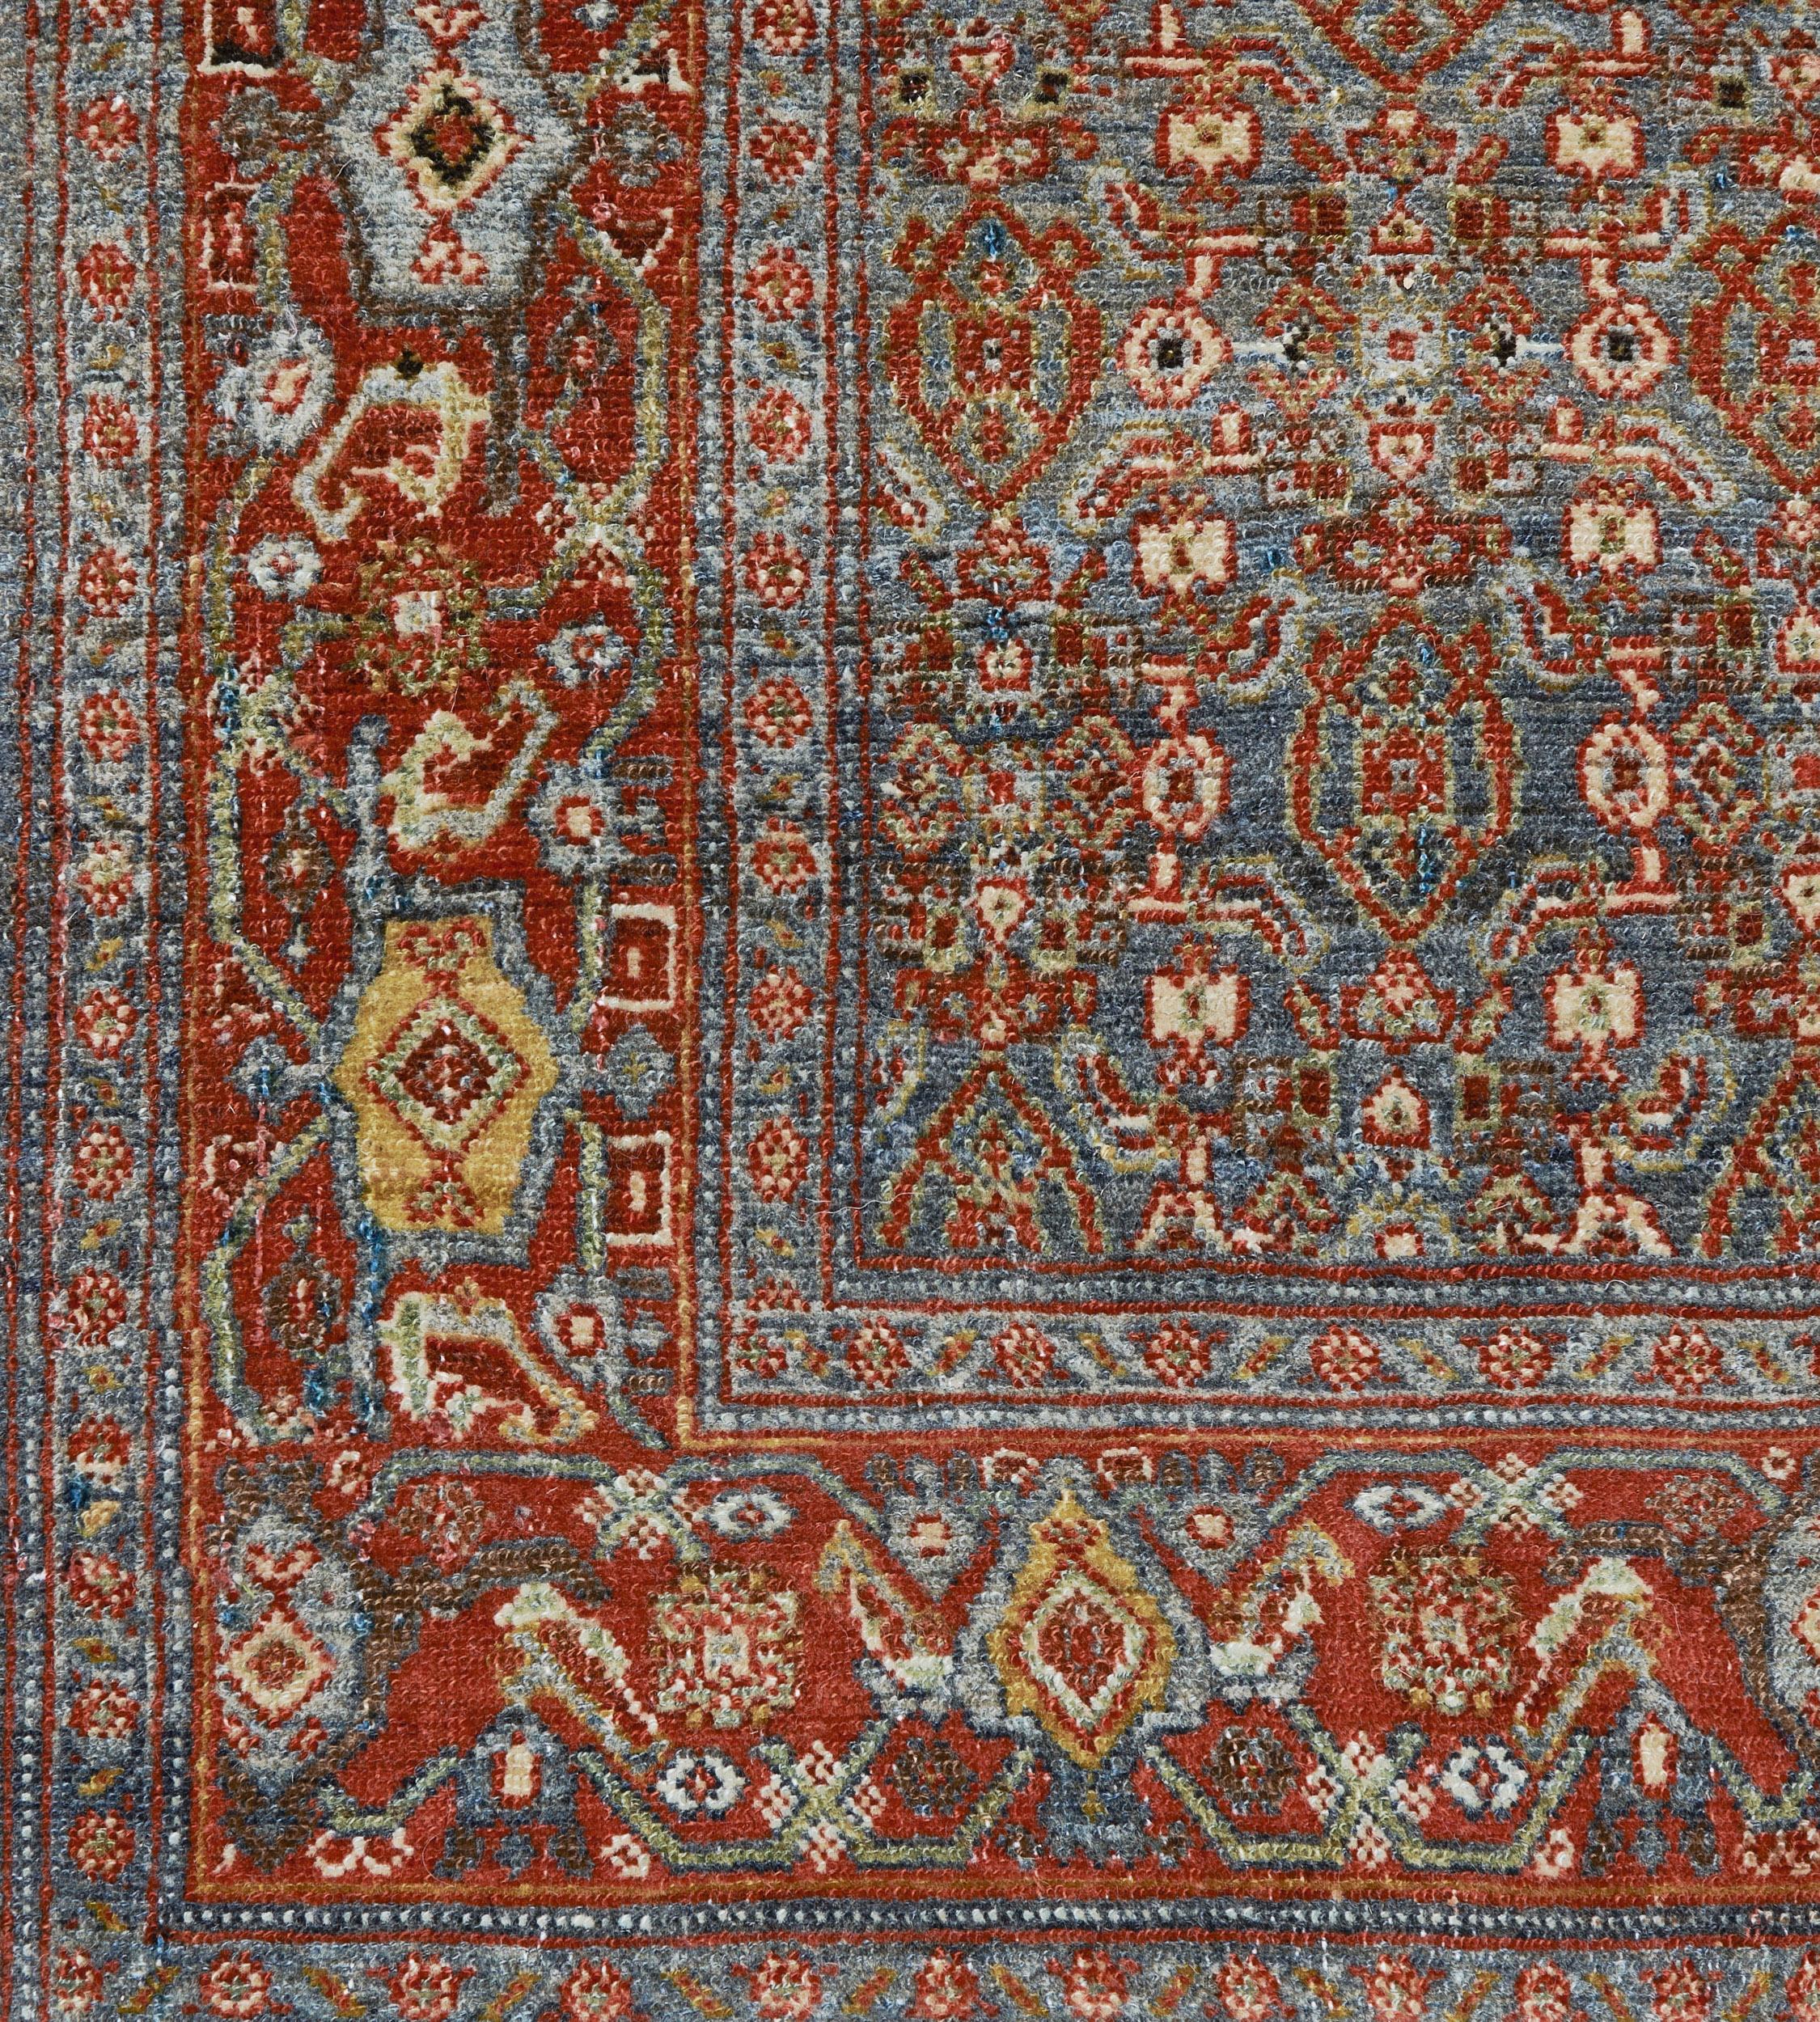 This antique Seneh runner features a shaded sea-blue field with an overall brick-red, light green and ivory herati-pattern, in tomato-red border of polychrome turtle-palmettes linked by angular floral and leafy vine between light blue floral vine